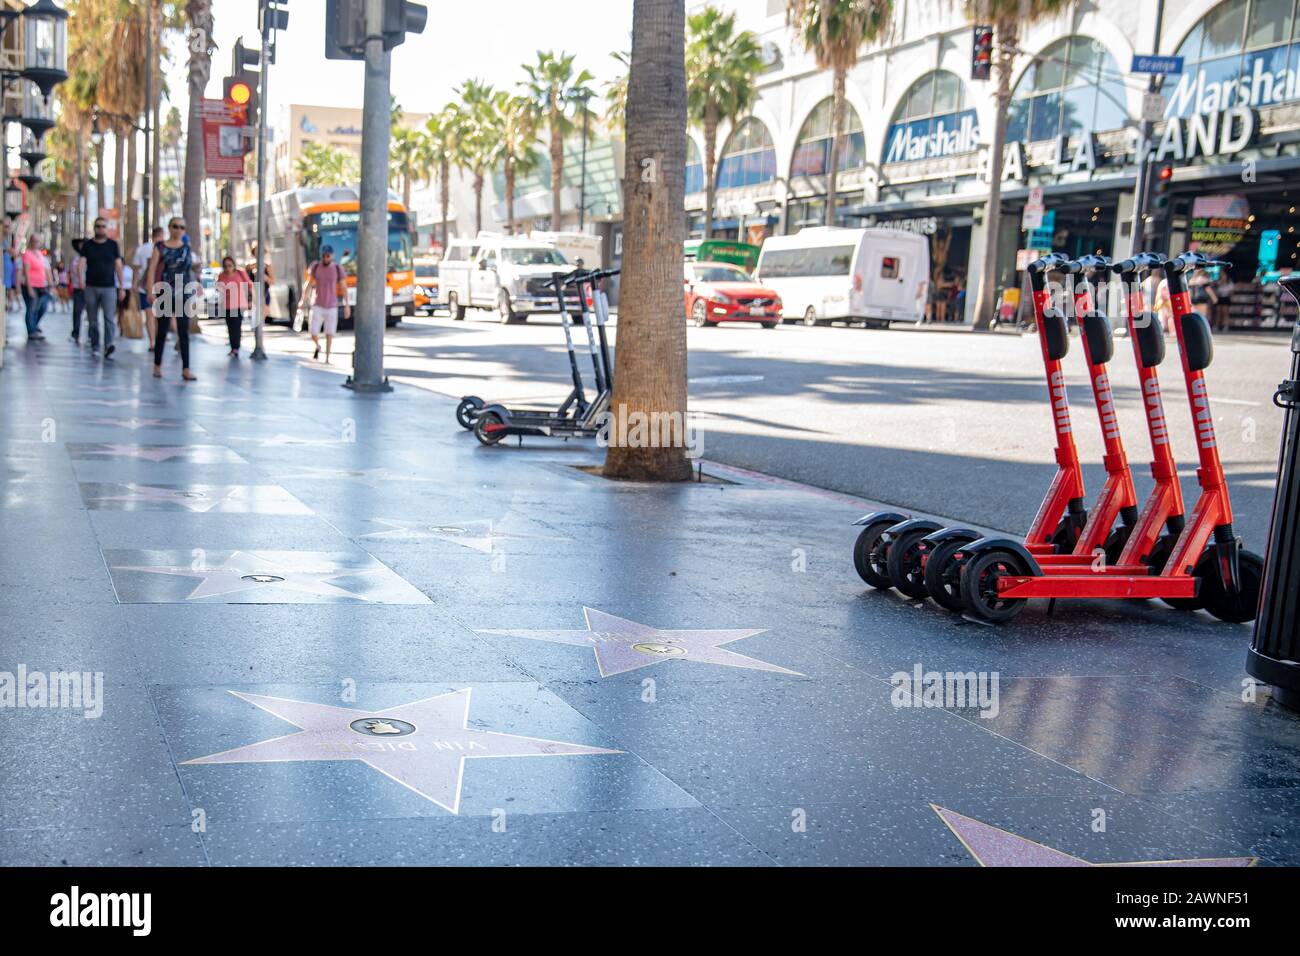 Los Angeles - september 5, 2019: Electric scooters for rent on the Hollywood Walk of Fame Stock Photo